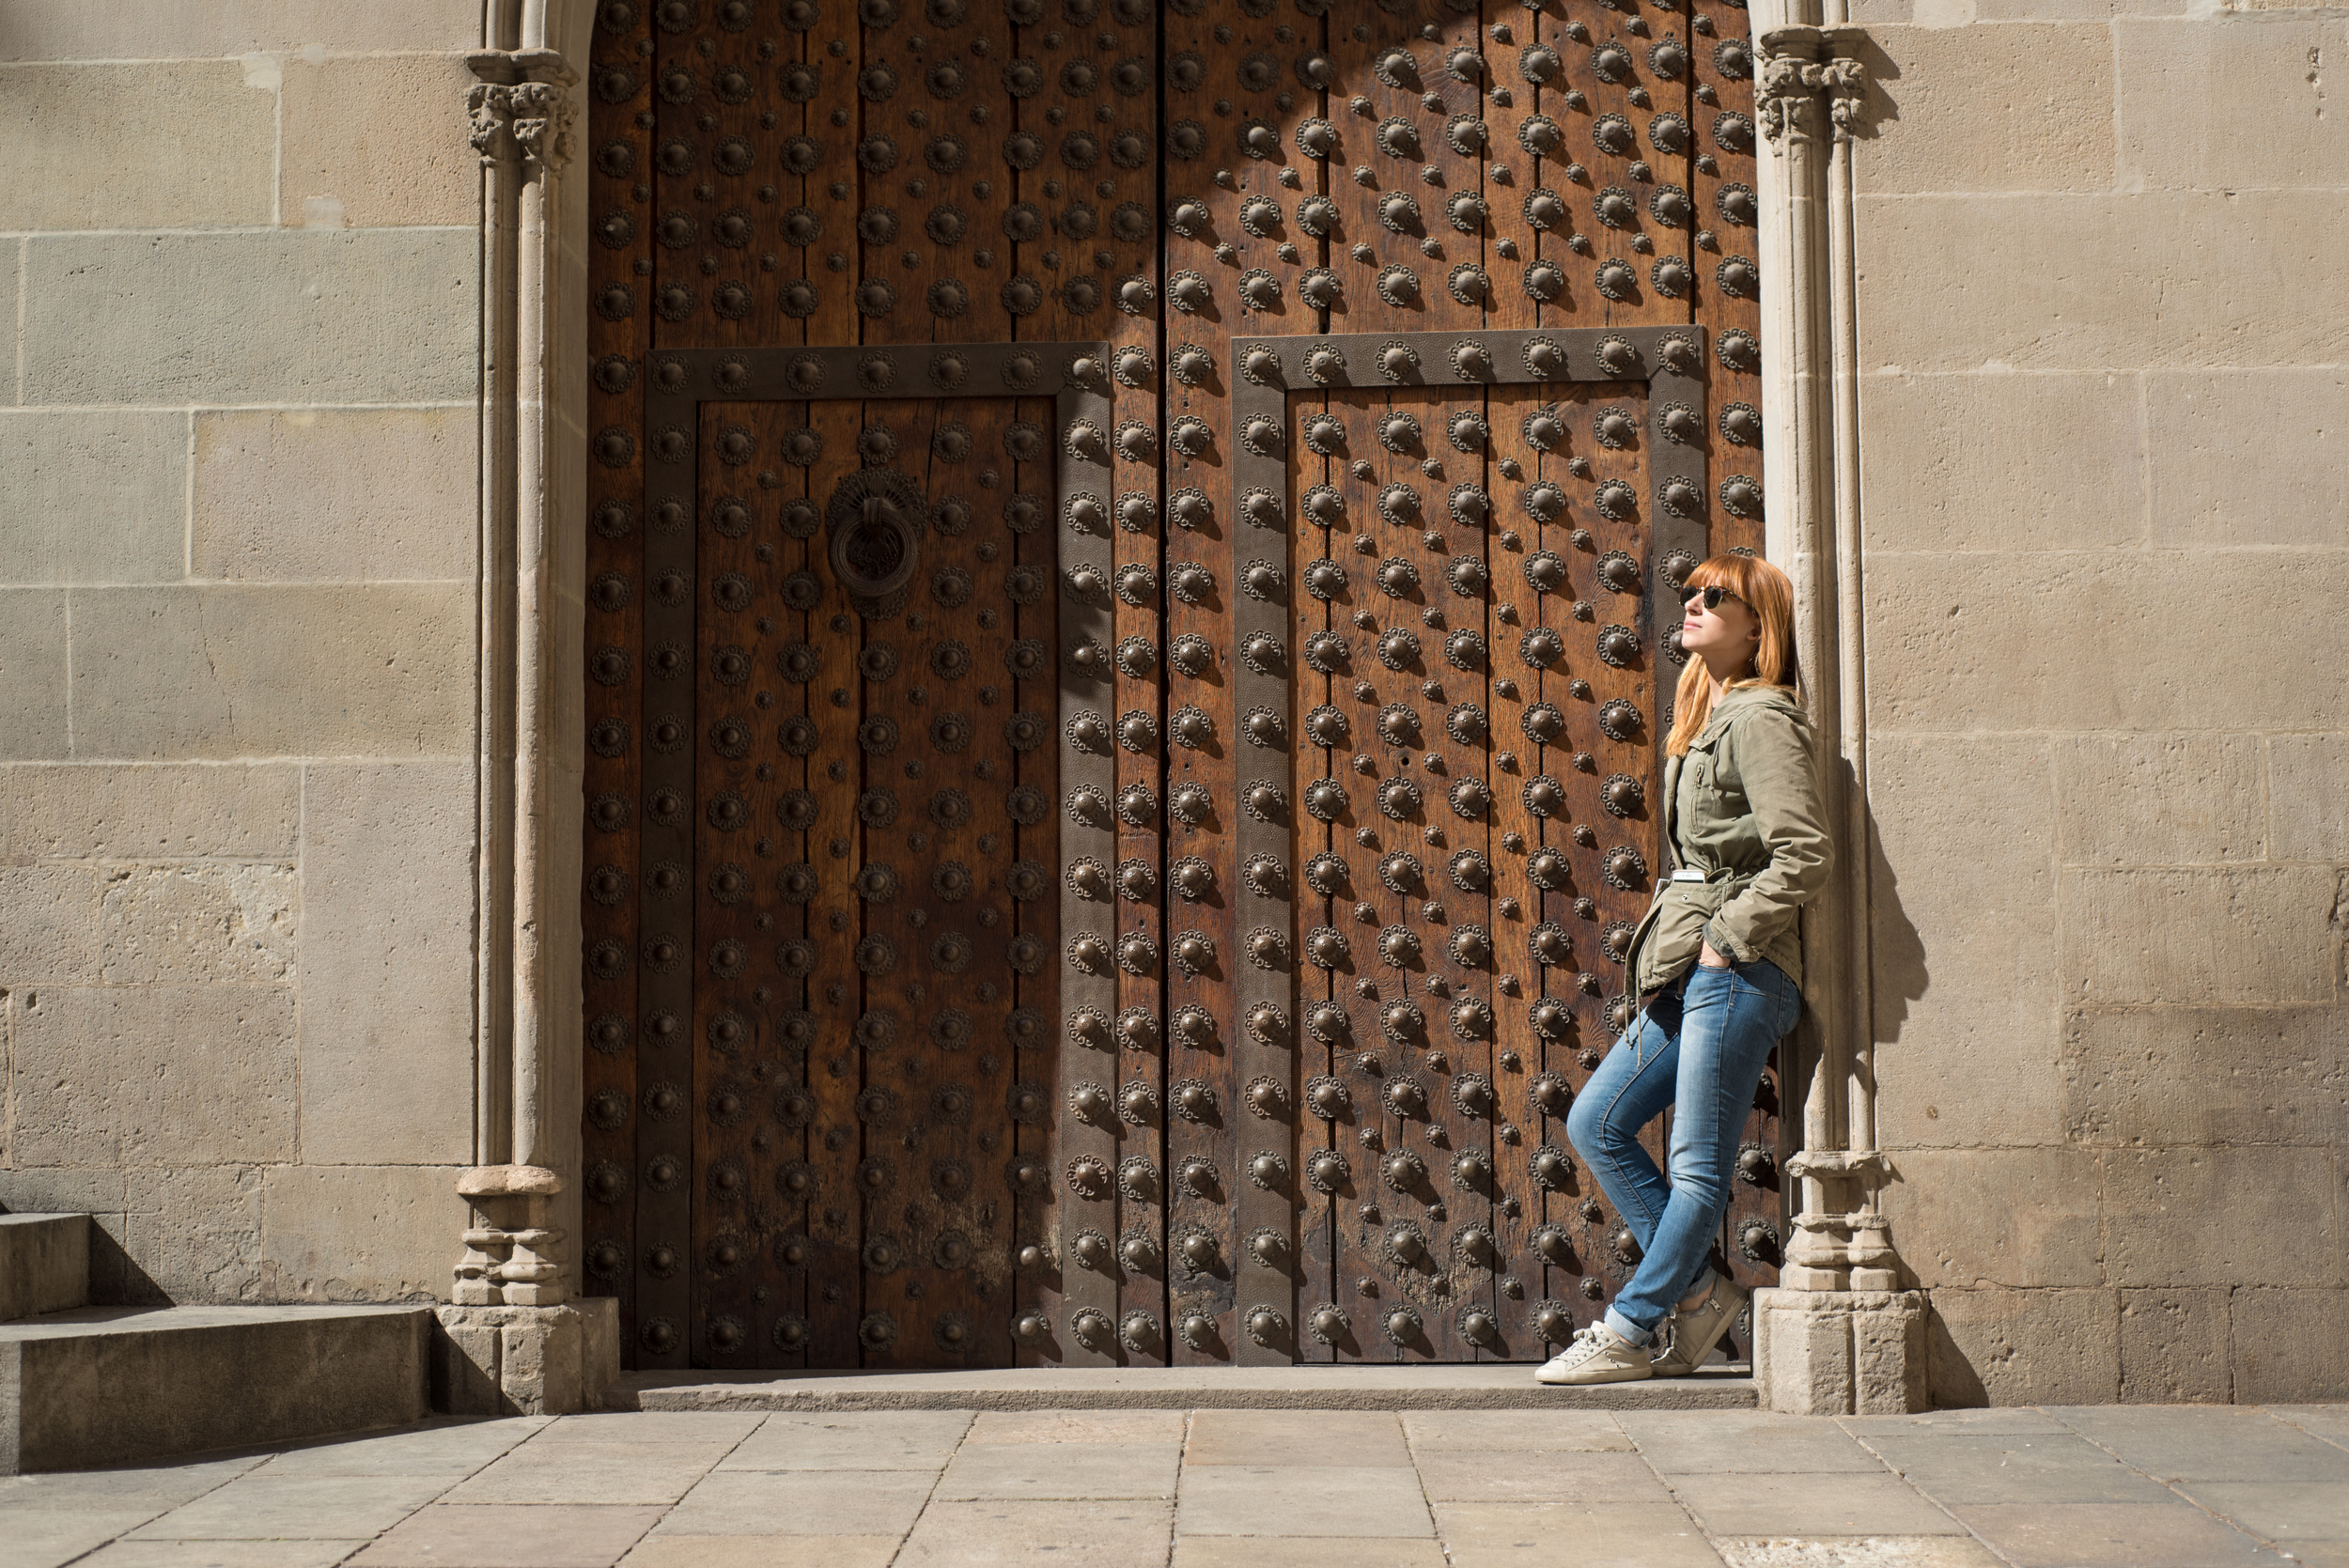  Serena from Venice posing in an interesting doorway on the Gothic Quarter Tour. Flytographer:  Francisco  